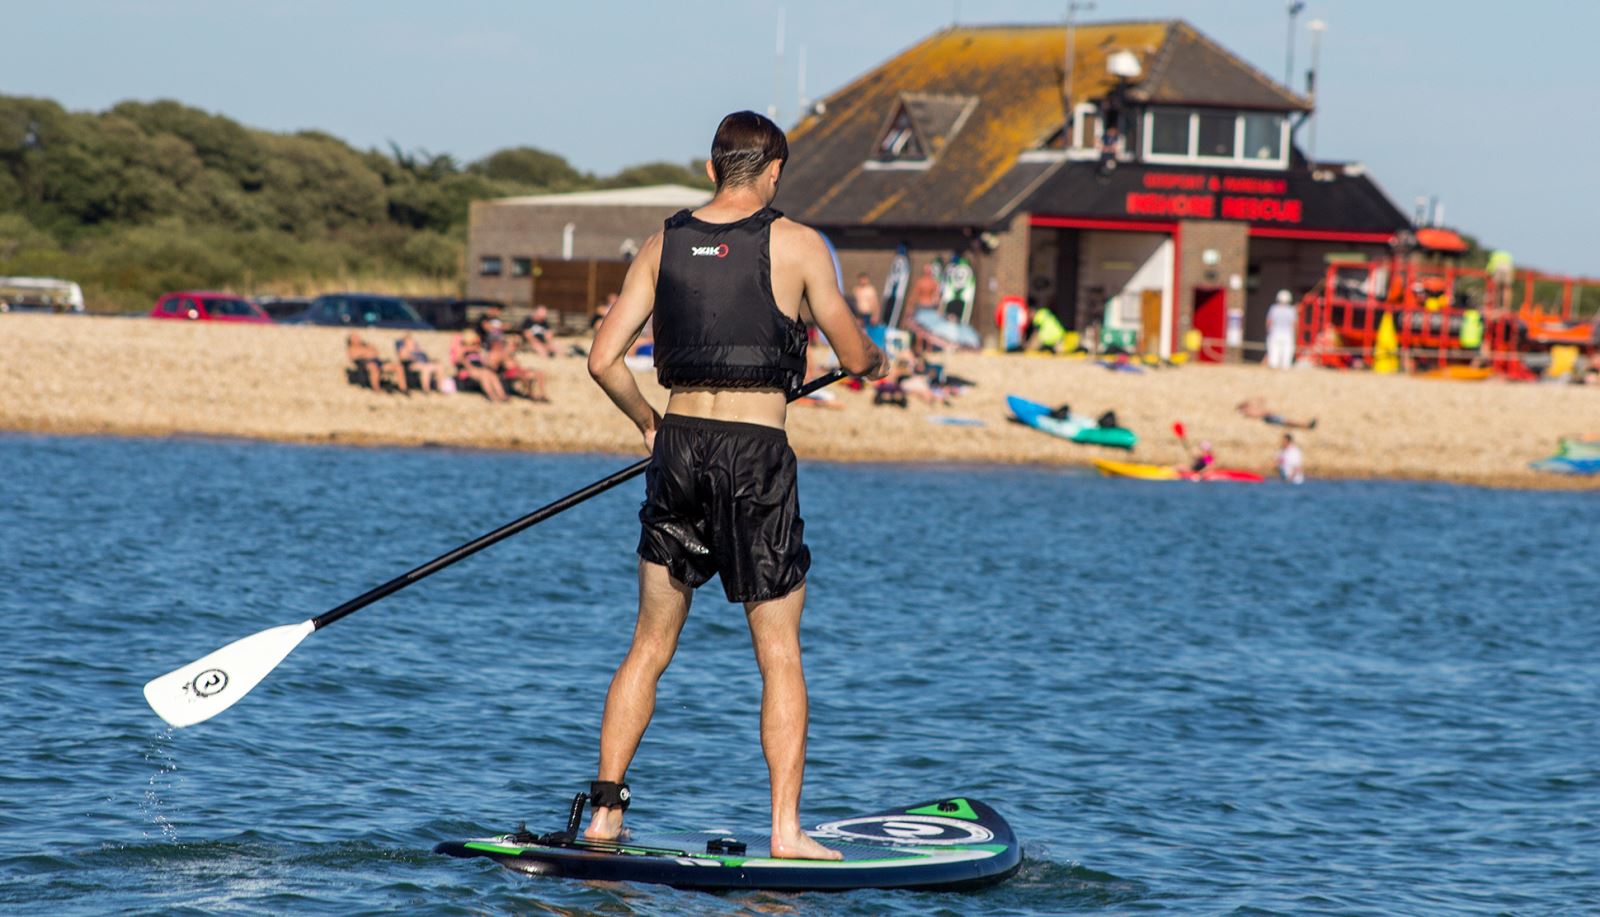 Stand Up Paddle Boarding at Stokes Bay in Gosport